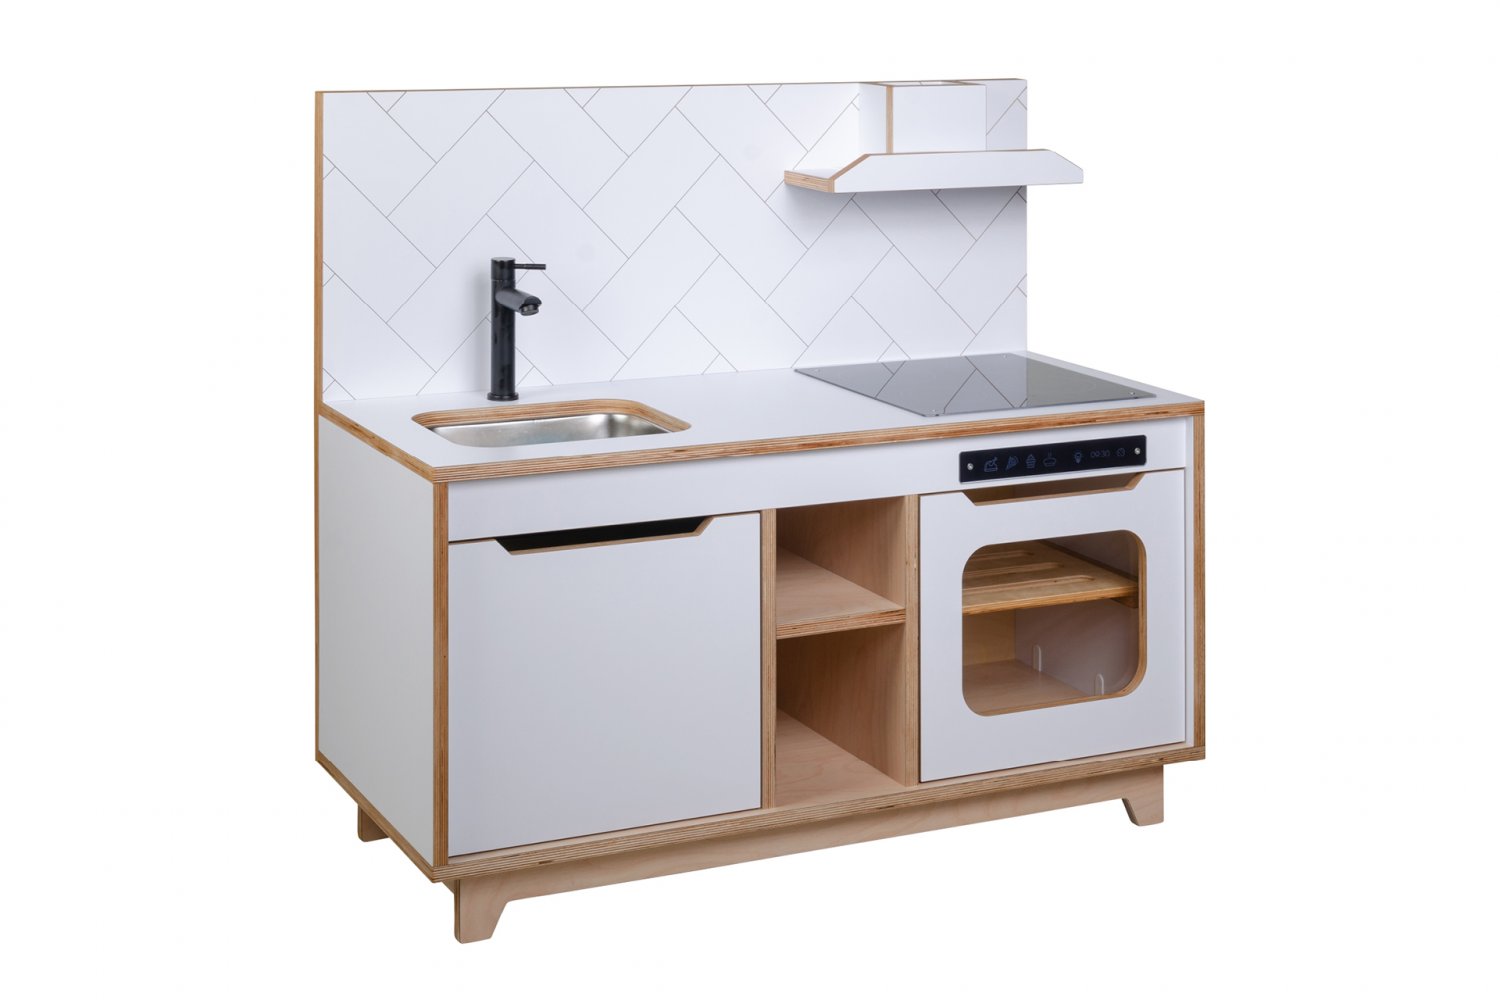 Wooden Plywood Kitchen for Early learning